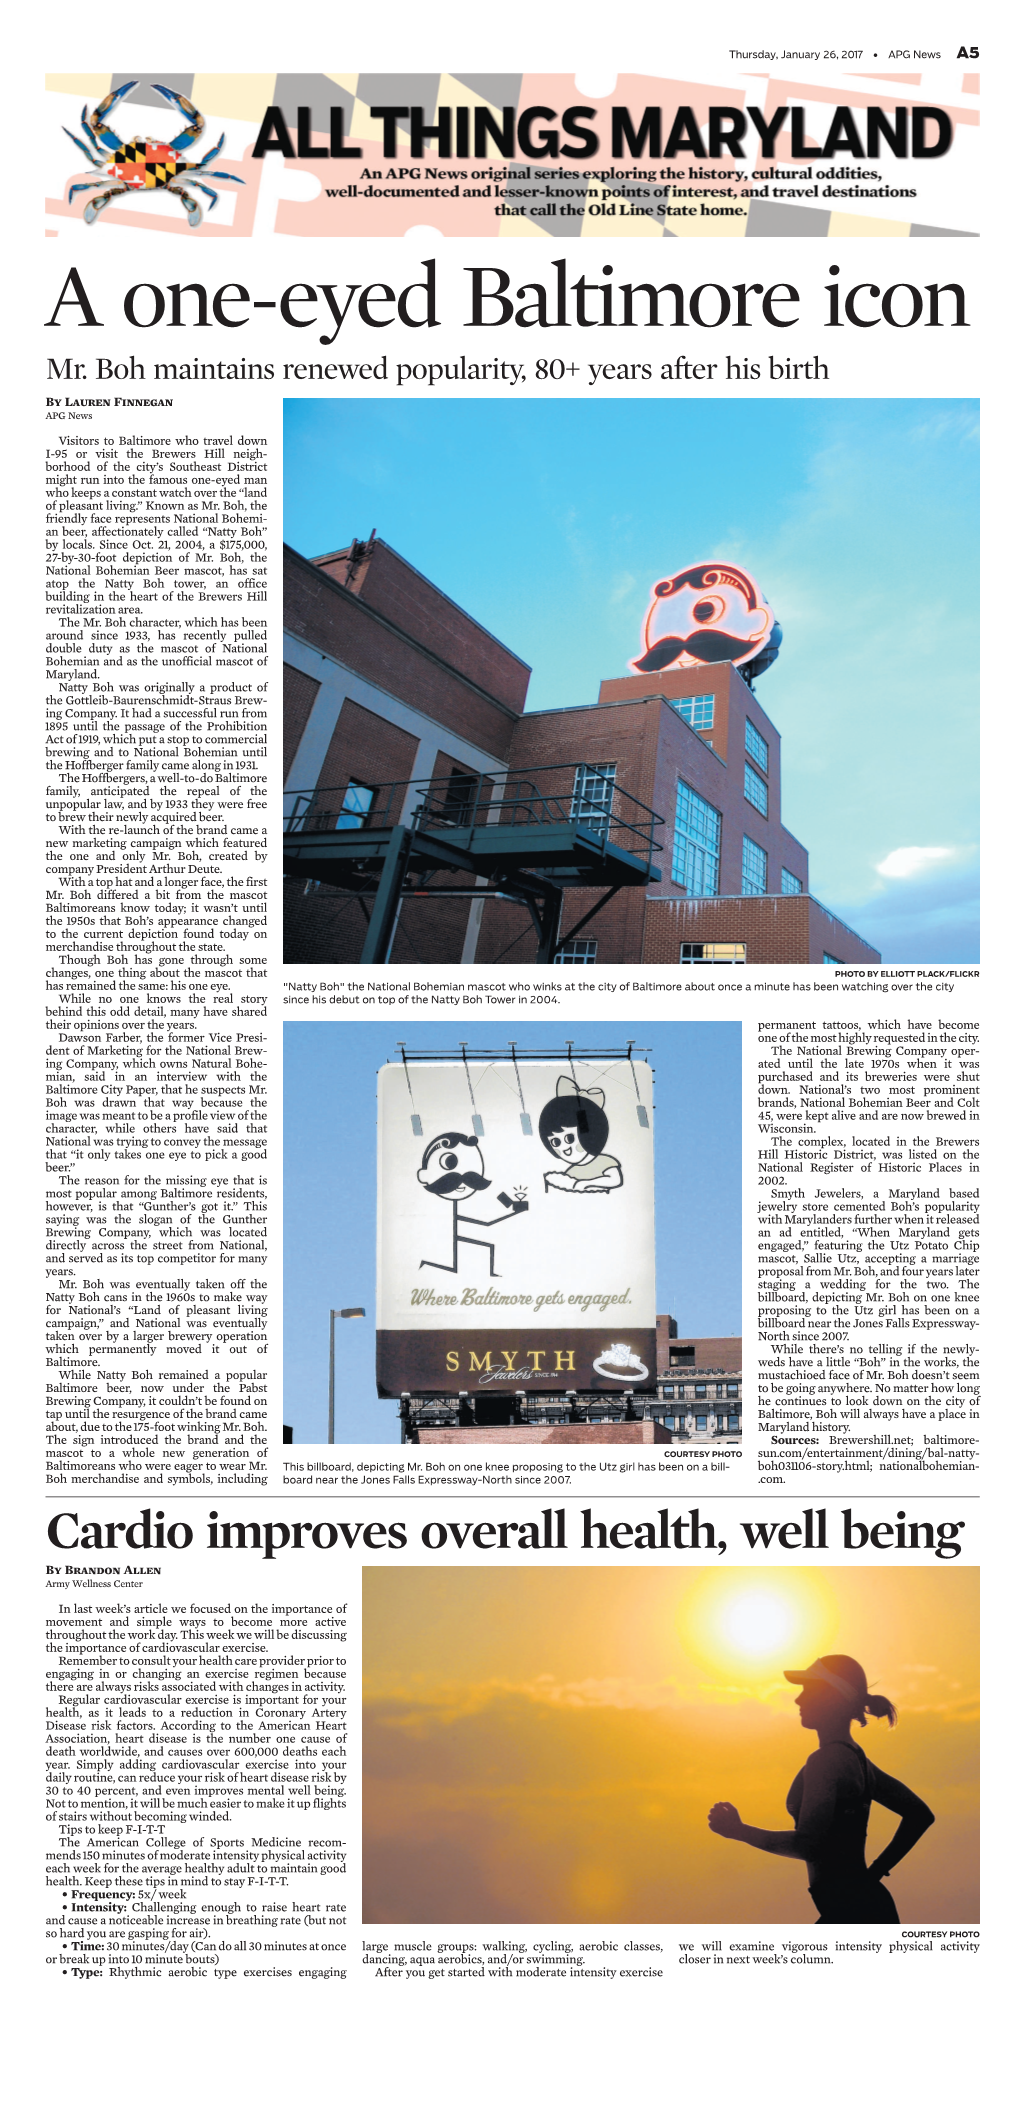 Cardio Improves Overall Health, Well Being by Brandon Allen Army Wellness Center